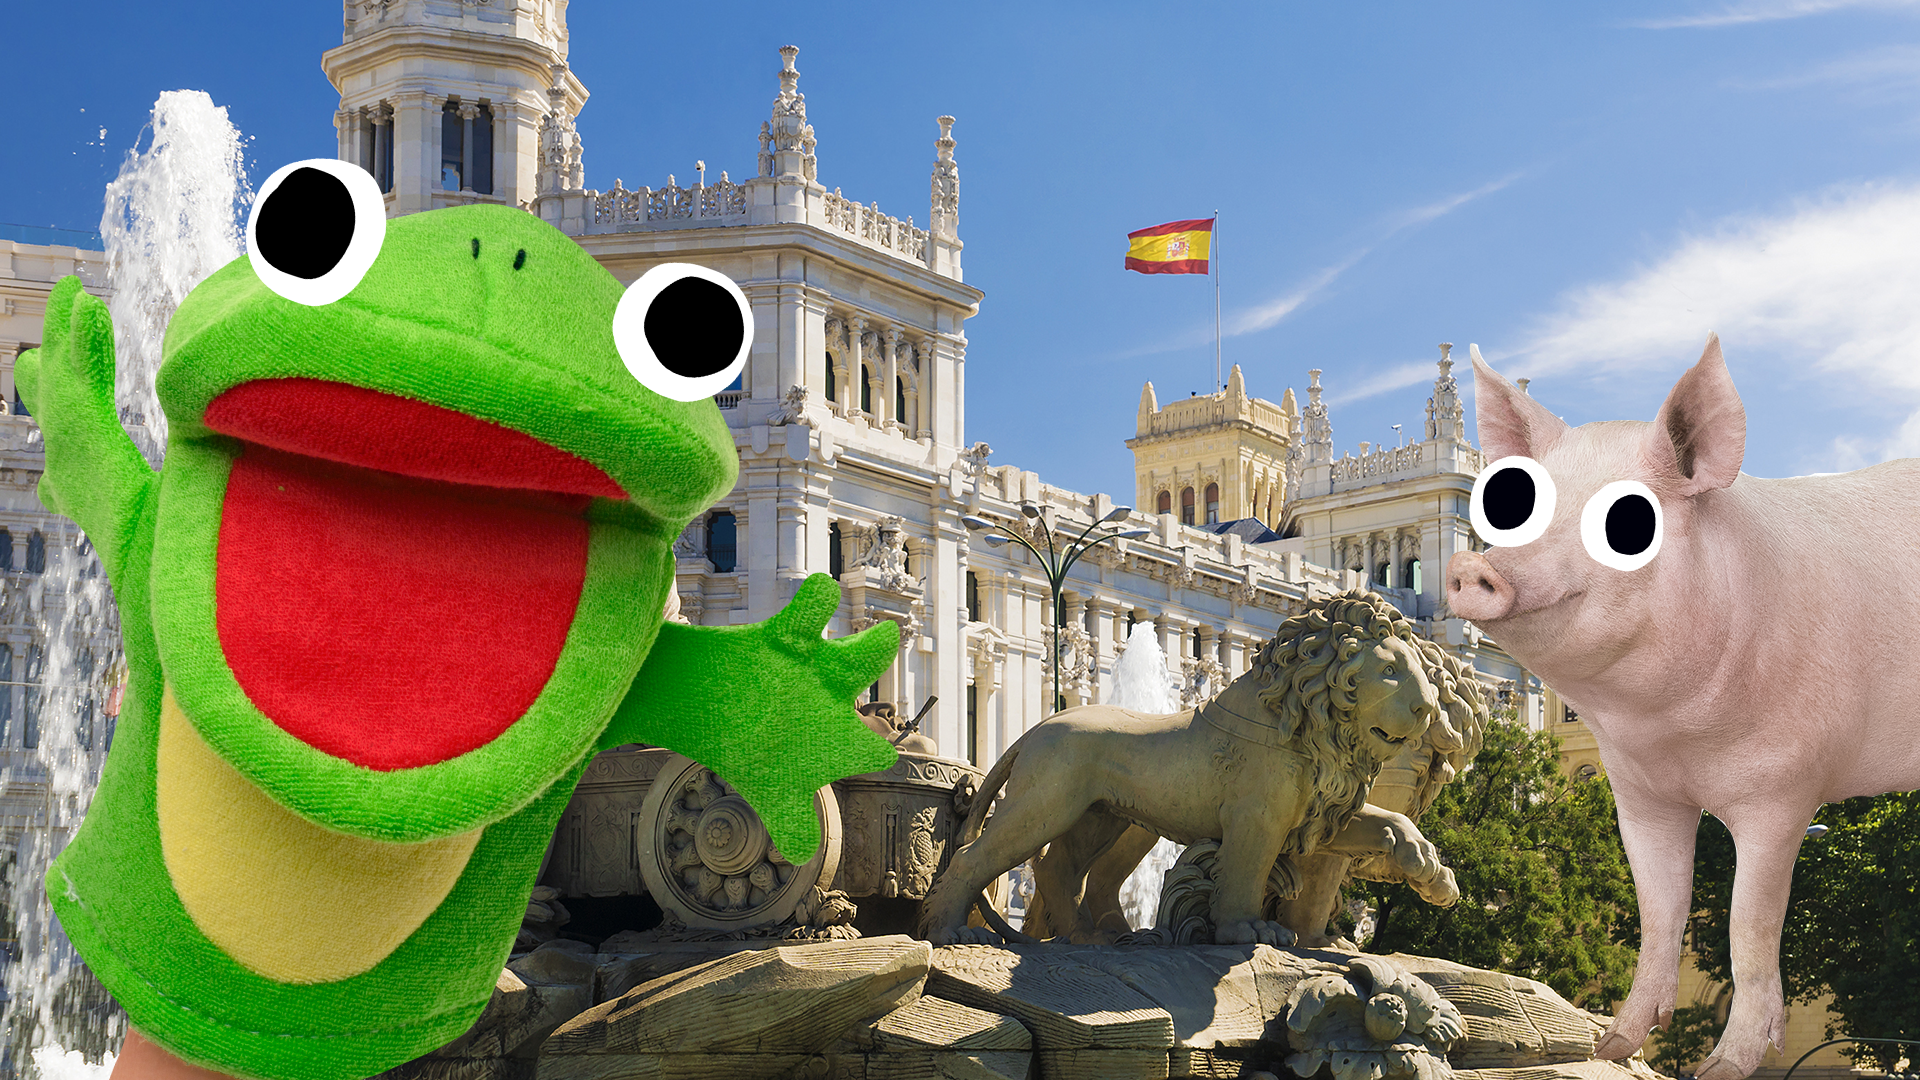 Beano Kermit and a pig in Madrid